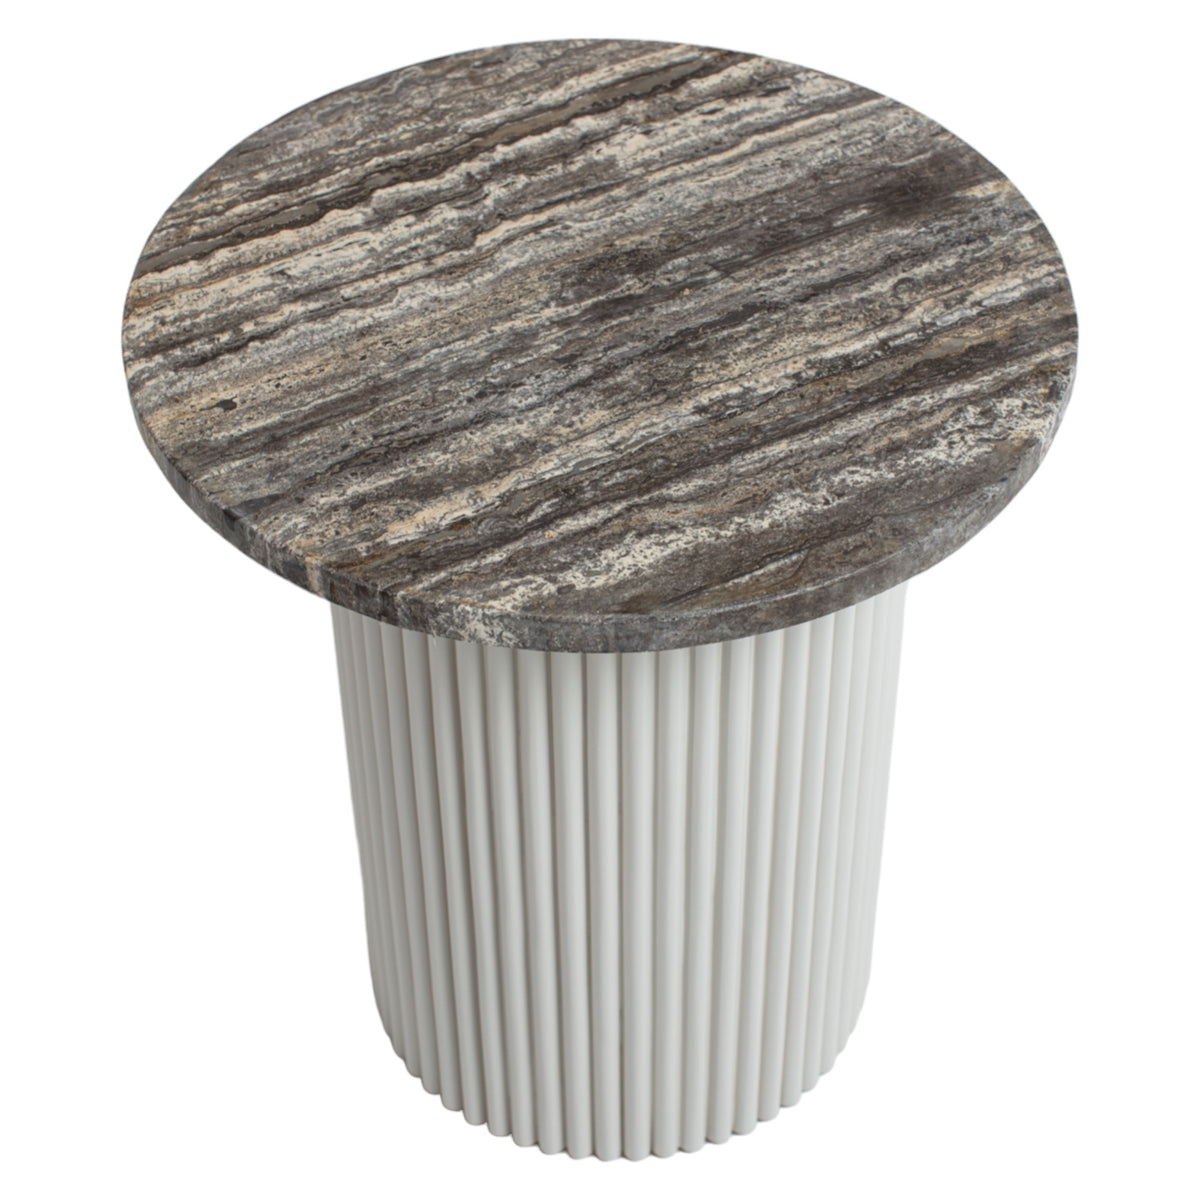 HAND MADE WHITE NORDIC GREY TRAVERTINE FLUTED SIDE TABLE